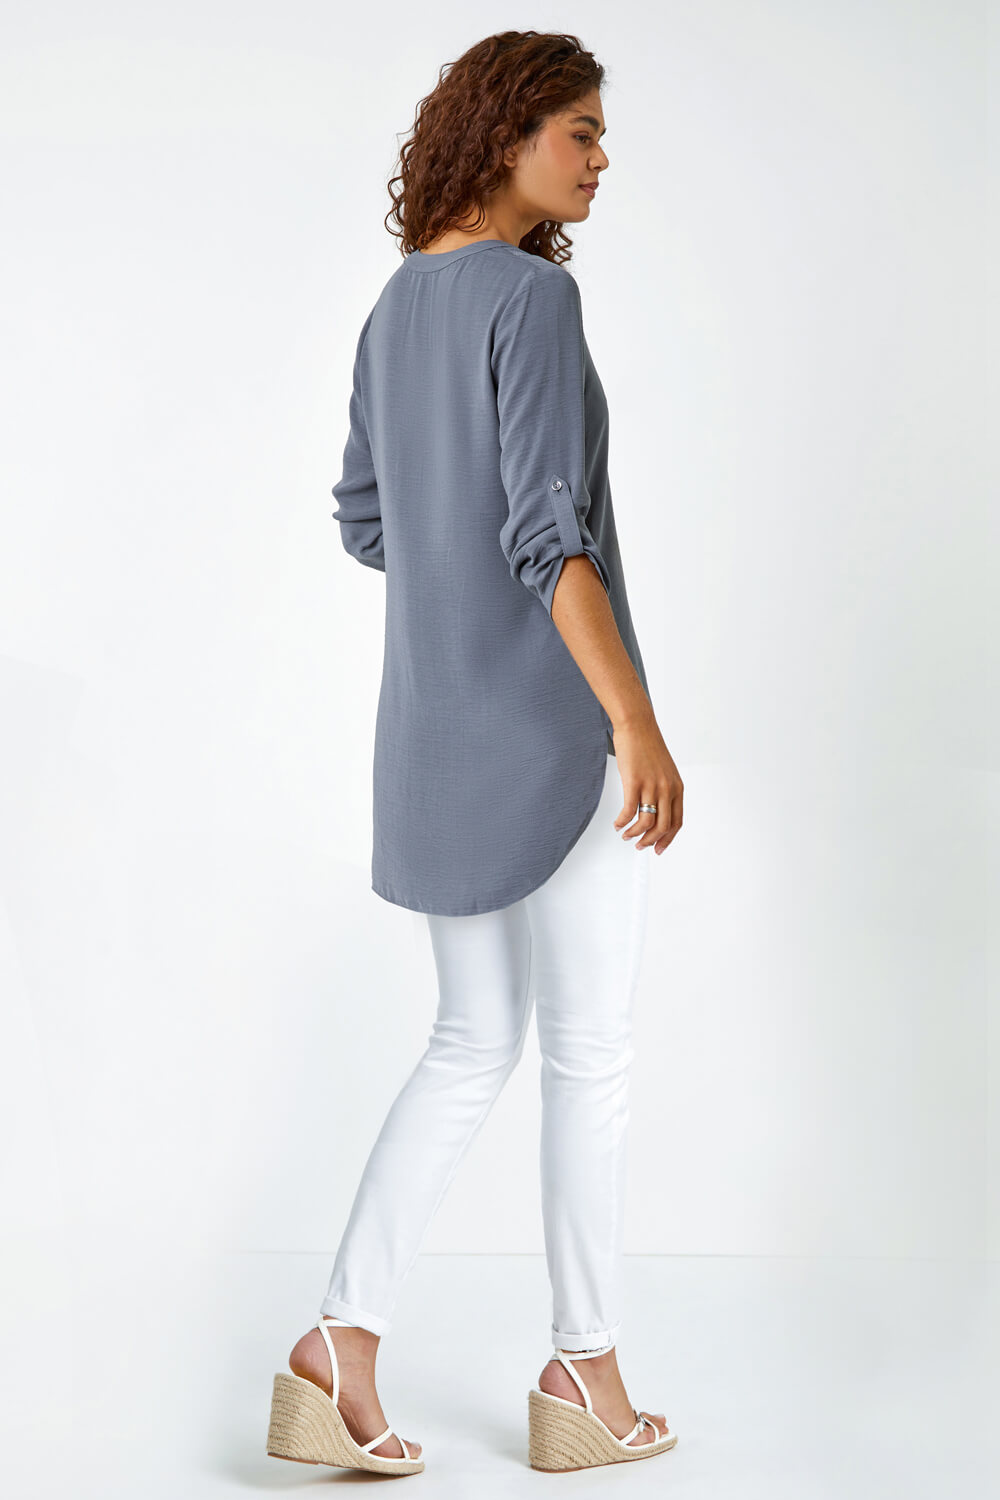 Grey Longline Button Detail Blouse, Image 3 of 5